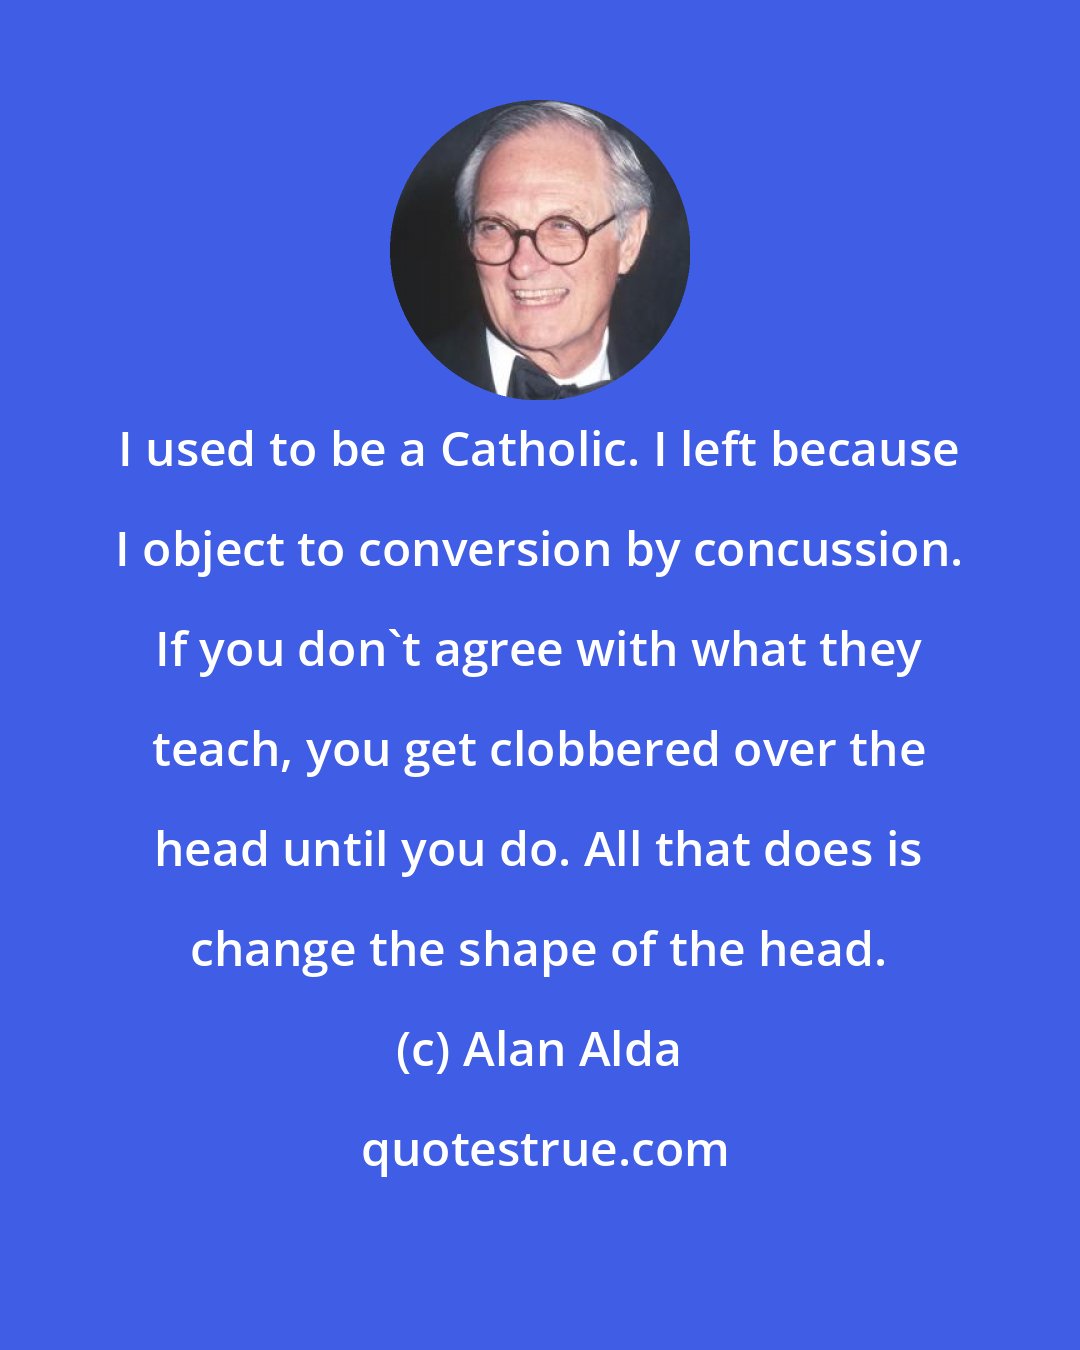 Alan Alda: I used to be a Catholic. I left because I object to conversion by concussion. If you don't agree with what they teach, you get clobbered over the head until you do. All that does is change the shape of the head.